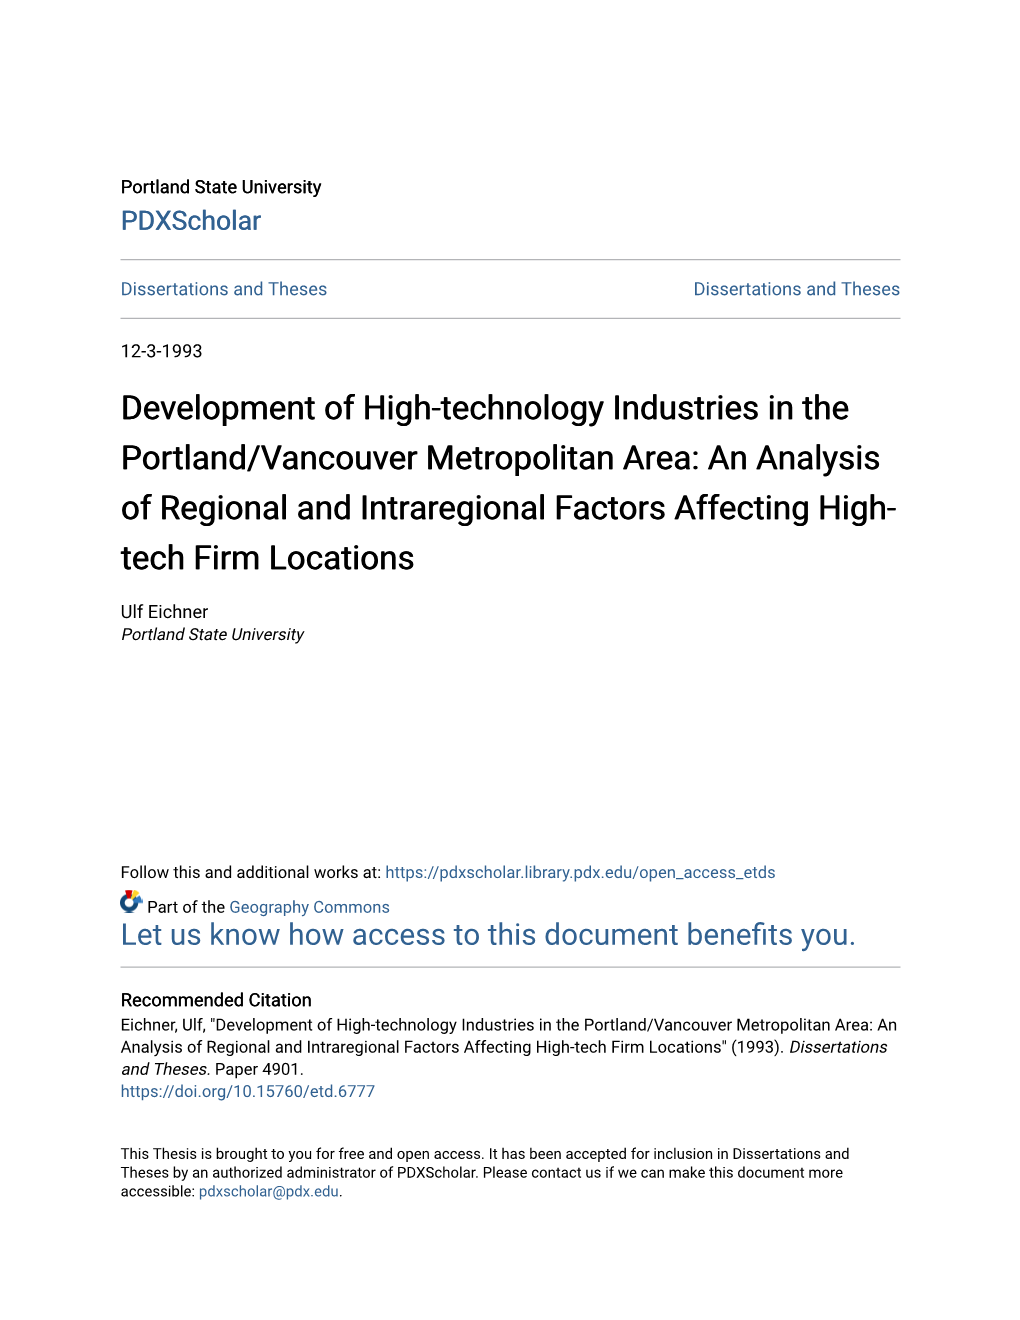 Development of High-Technology Industries in the Portland/Vancouver Metropolitan Area